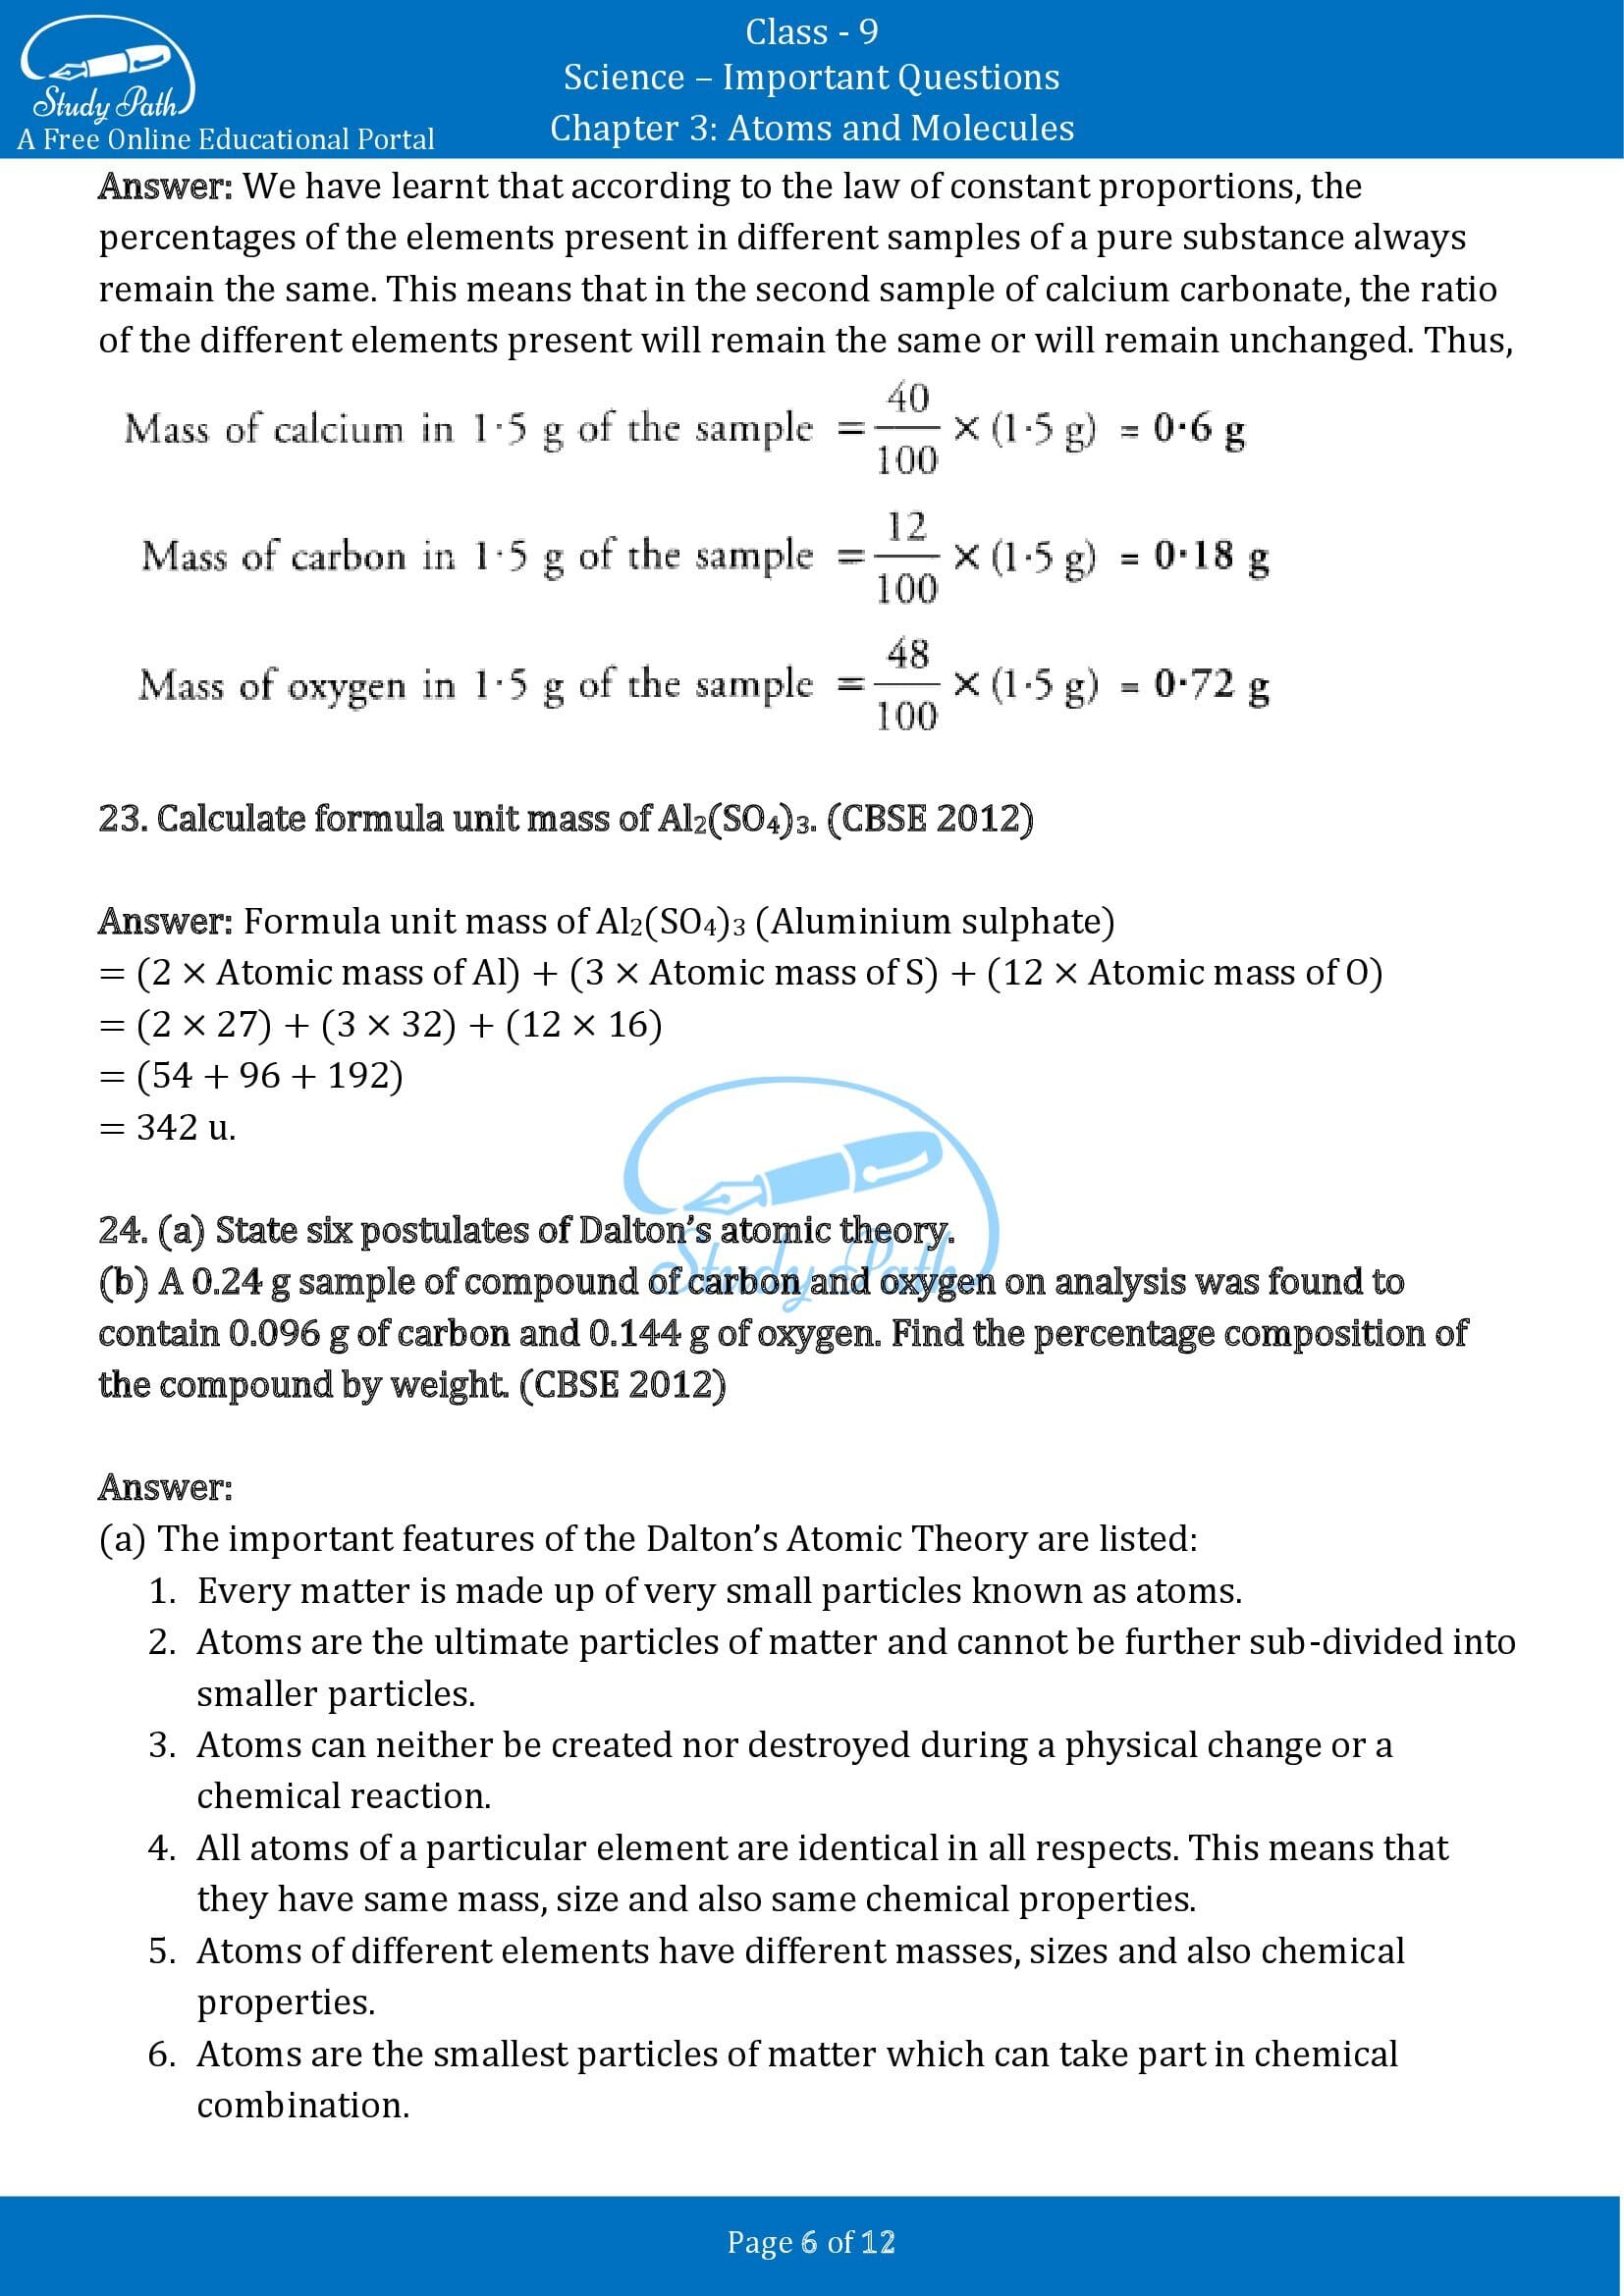 Important Questions for Class 9 Science Chapter 3 Atoms and Molecules 00006